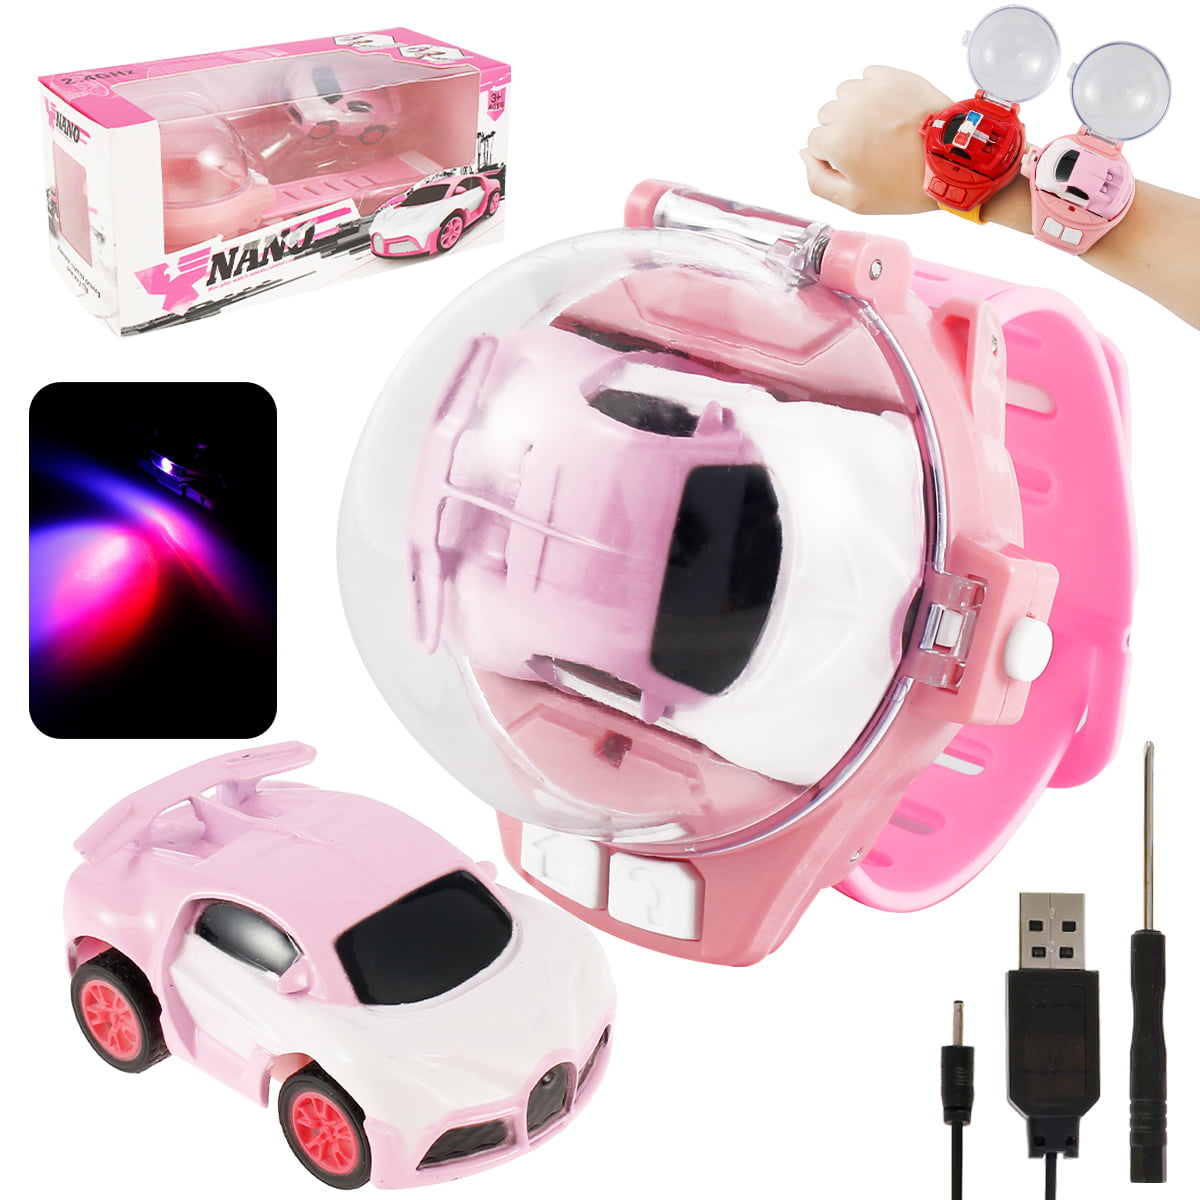 Mini Wrist Watch Remote Control Car Toys for Boys Grils, 2.4 GHz USB  Charging RC Small Car with LED Taillight, Cute Racing Car Gifts for Kids  Ages 4+